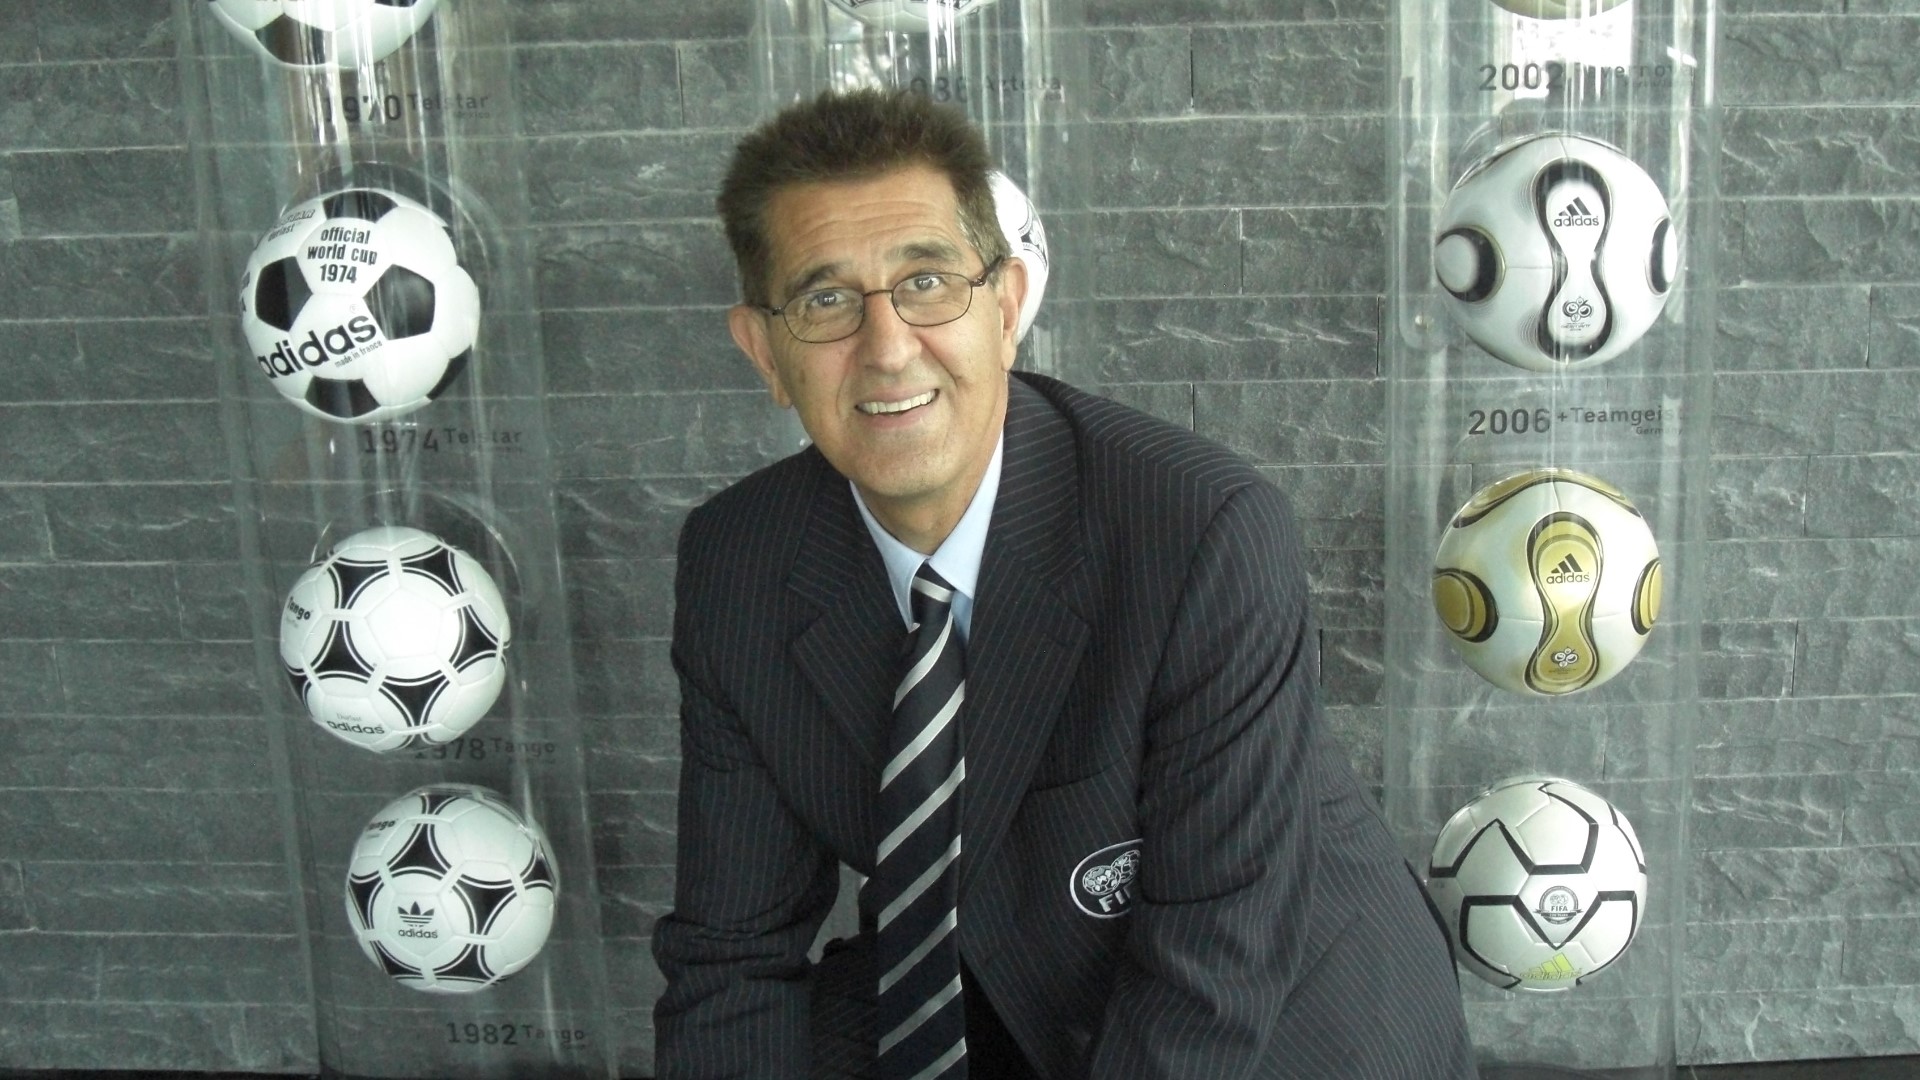 Baharmast was a FIFA international referee for six years, served on the US Soccer Federation, and is currently director of referees for Colorado Soccer Association.